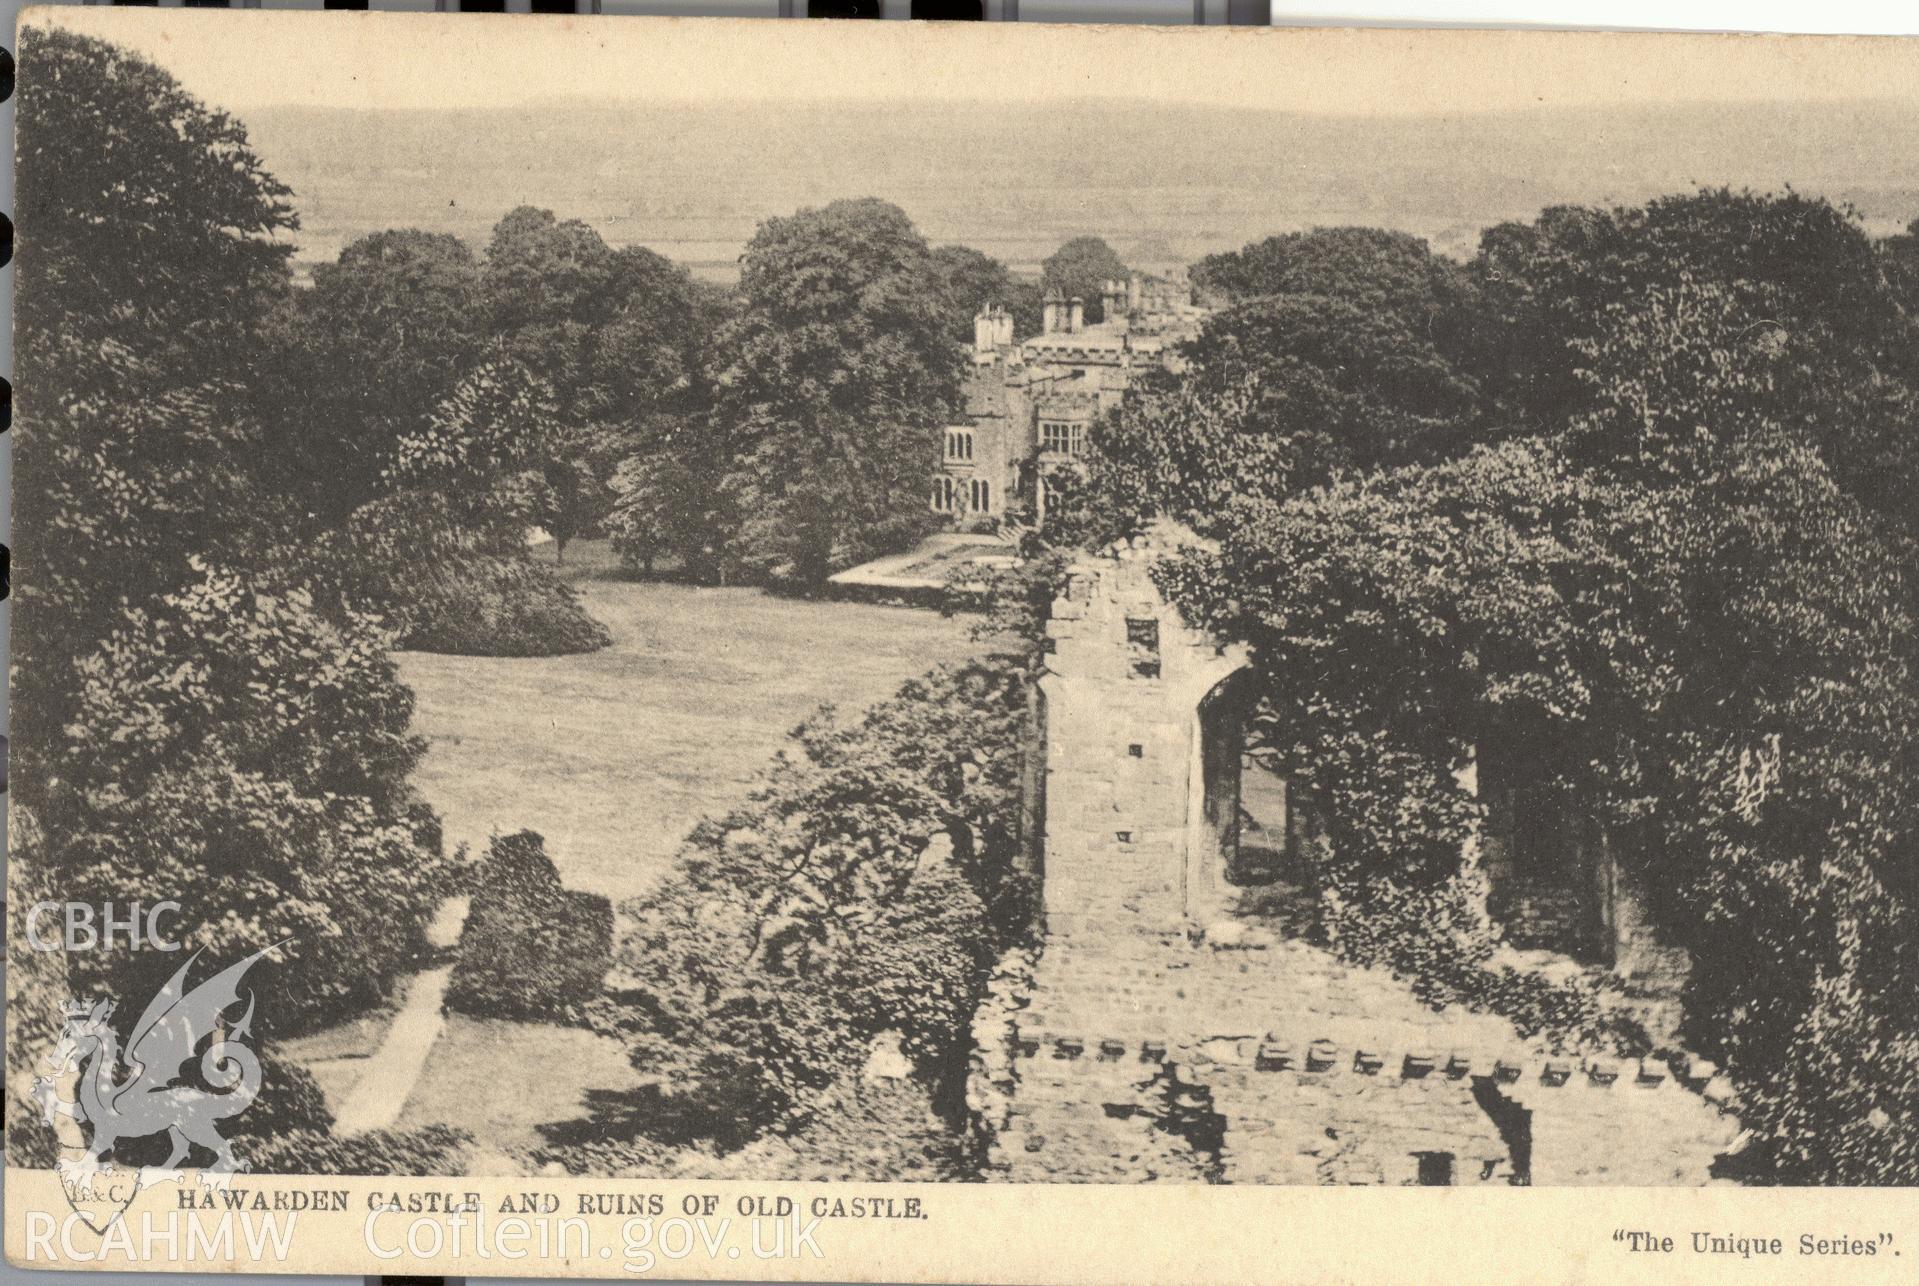 Digitised postcard image of Hawarden Castle, The Unique Series T.S.B. & C. Produced by Parks and Gardens Data Services, from an original item in the Peter Davis Collection at Parks and Gardens UK. We hold only web-resolution images of this collection, suitable for viewing on screen and for research purposes only. We do not hold the original images, or publication quality scans.